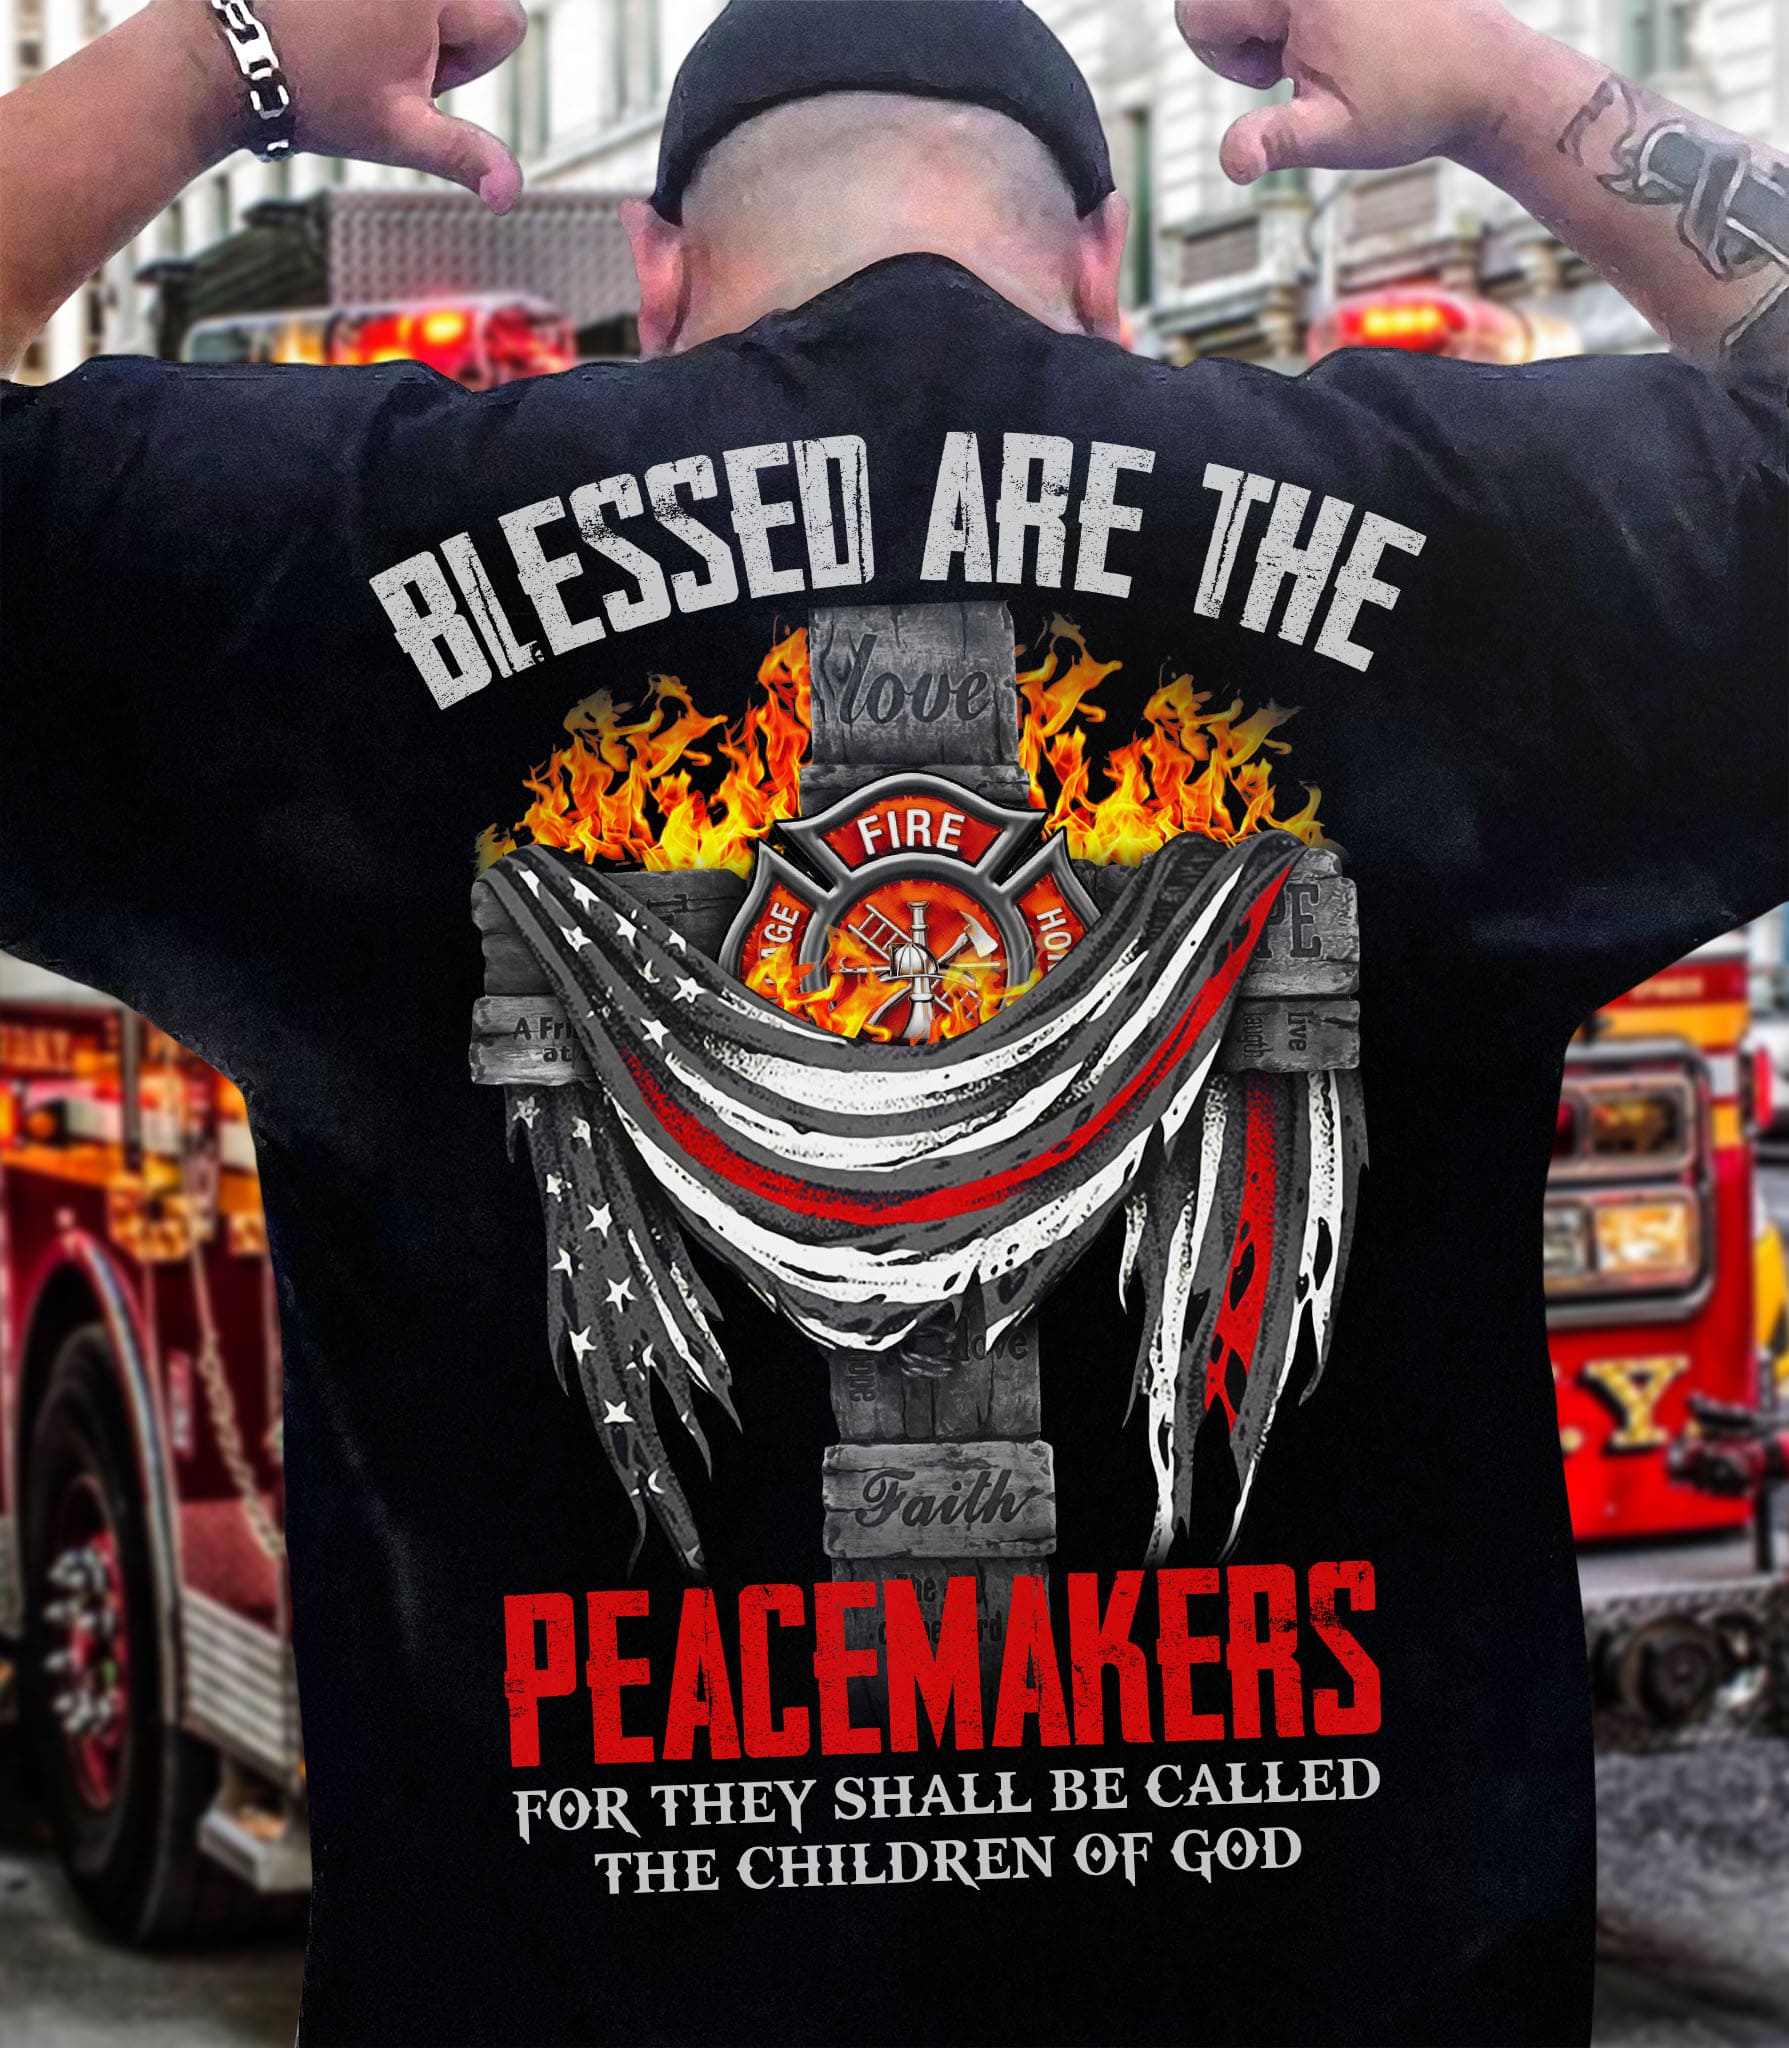 America God's Cross Firefighter - Blessed are the peacemakers for they shall be called the children of god